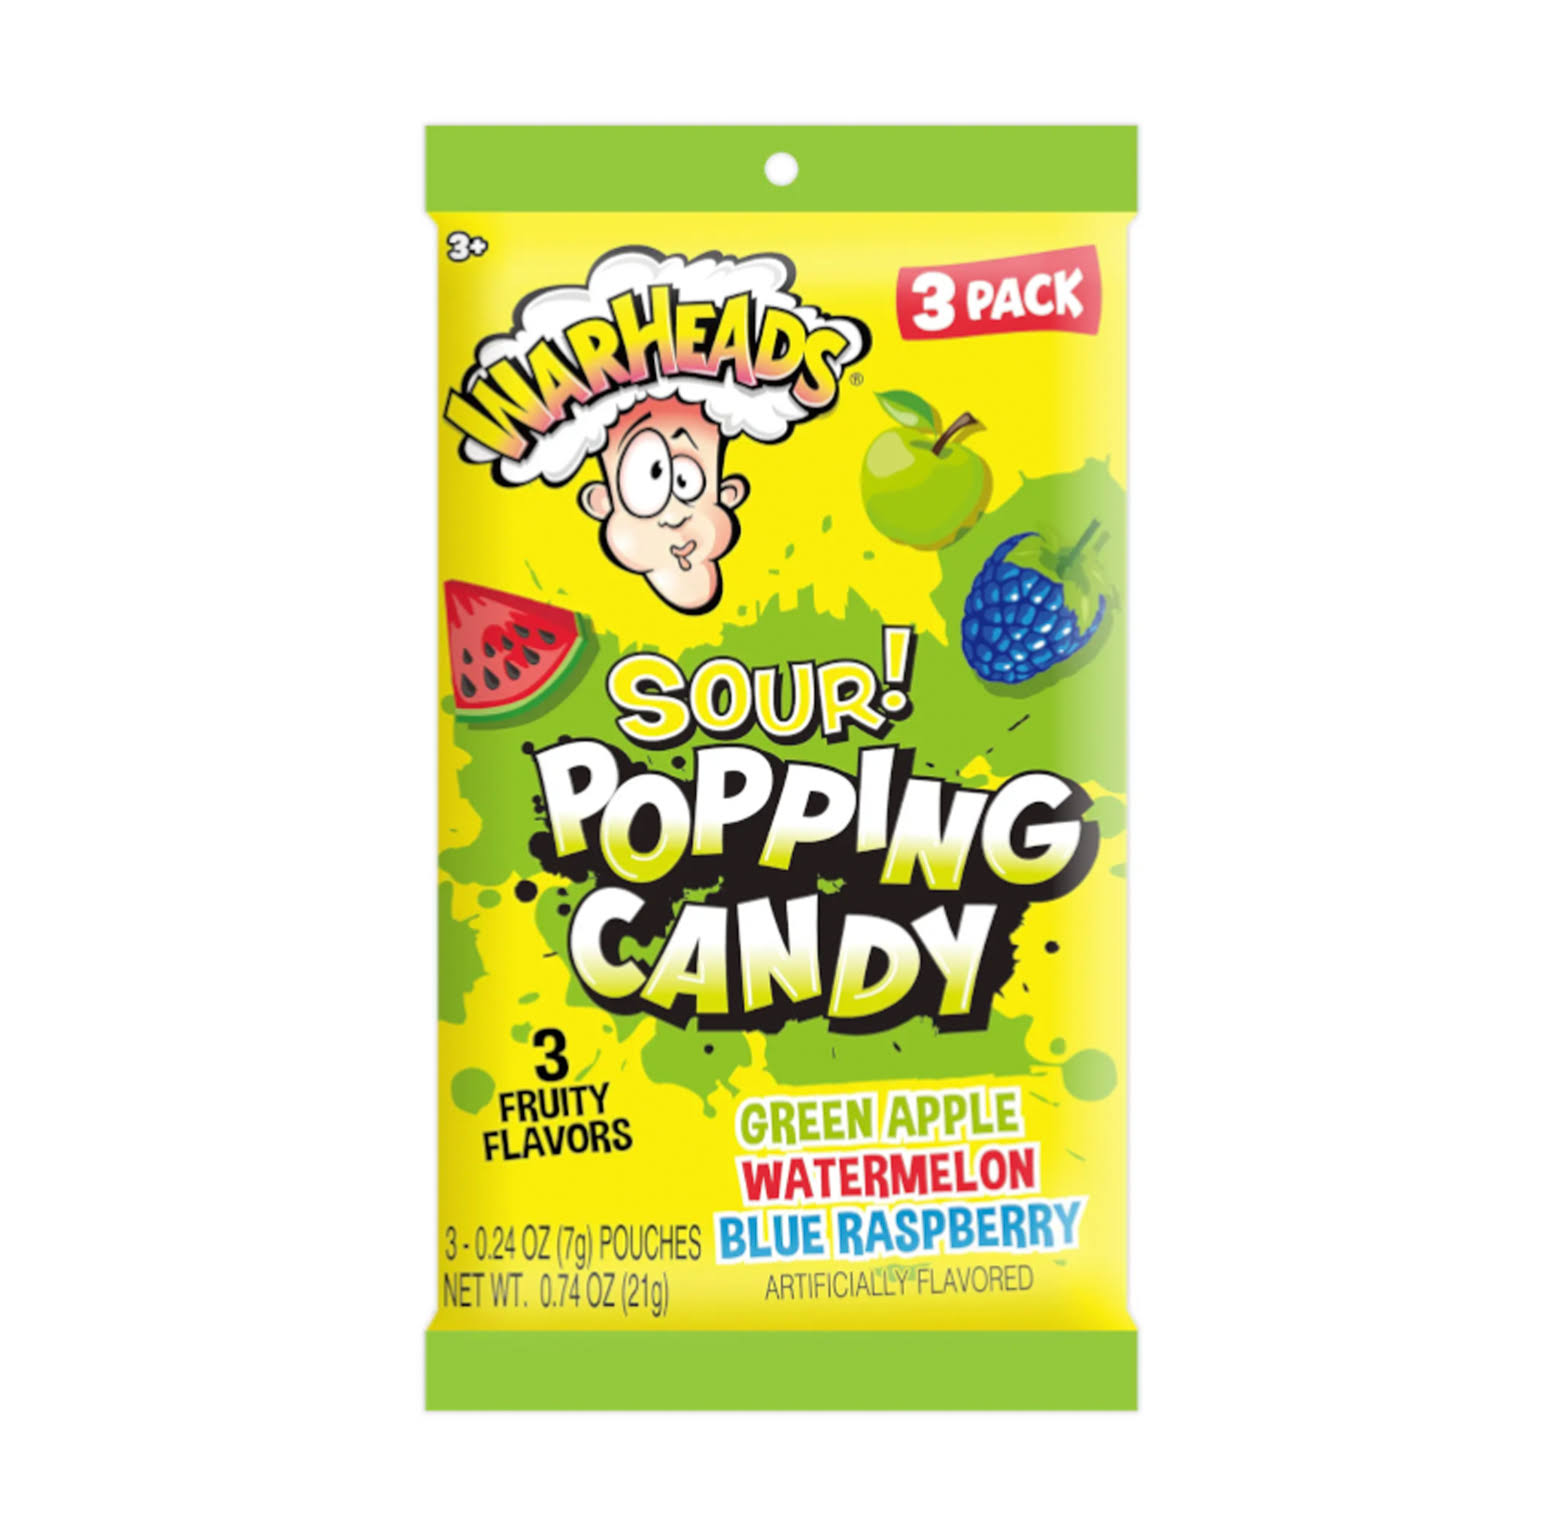 Warheads - Sour Popping Candy, 3-Pack